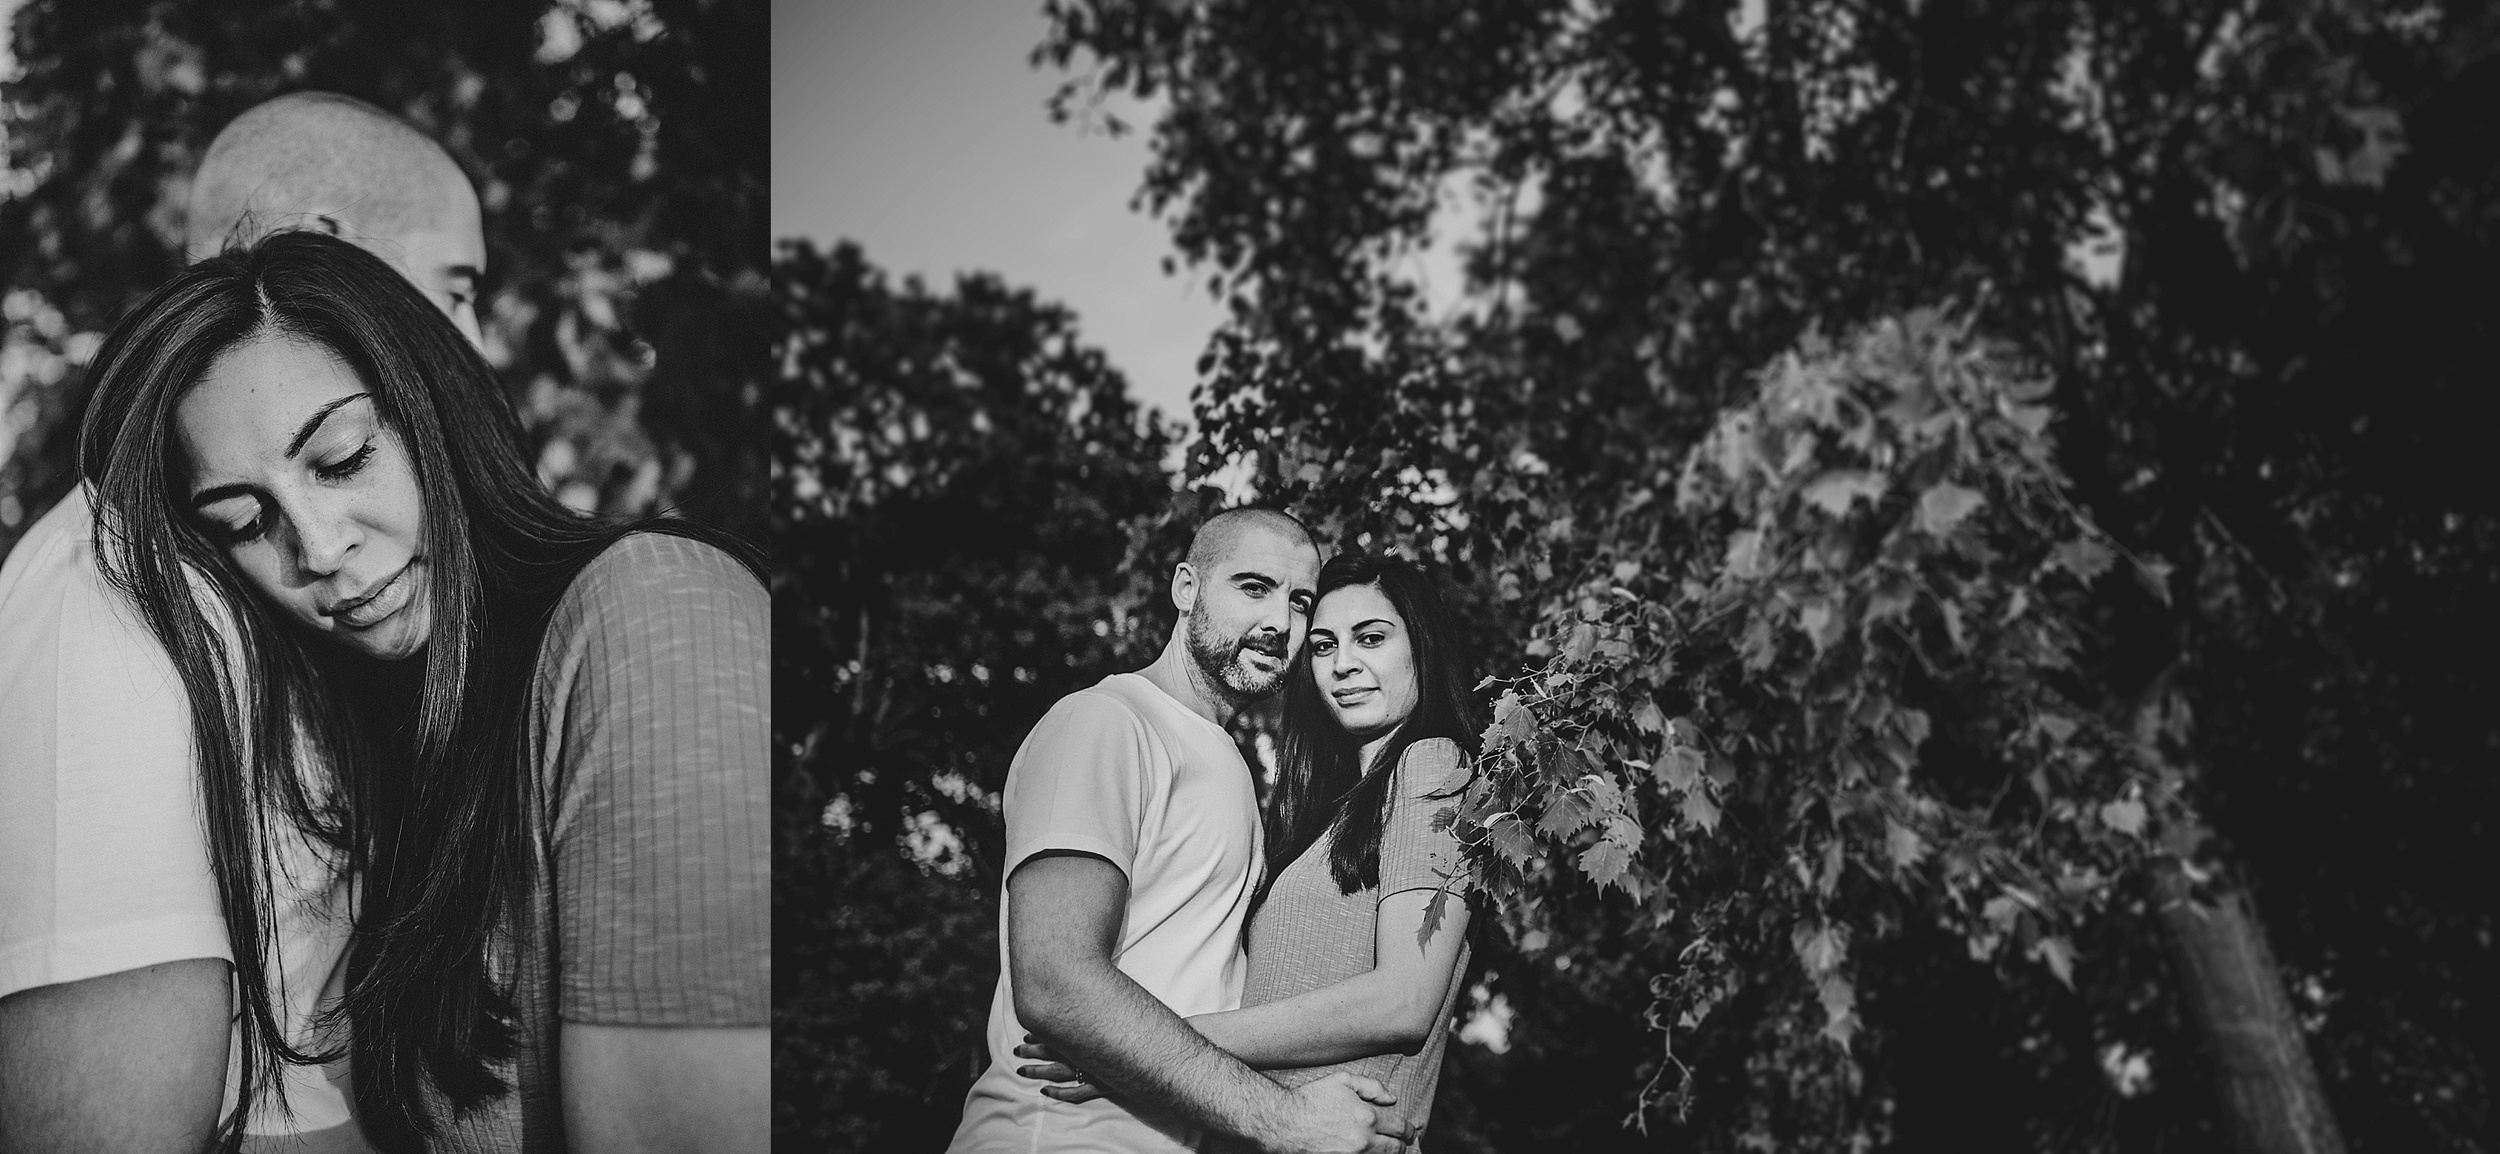 Love Shoot Couples Portraits at Hylands House Chelmsford Essex UK Documentary Portrait and Lifestyle Photographer